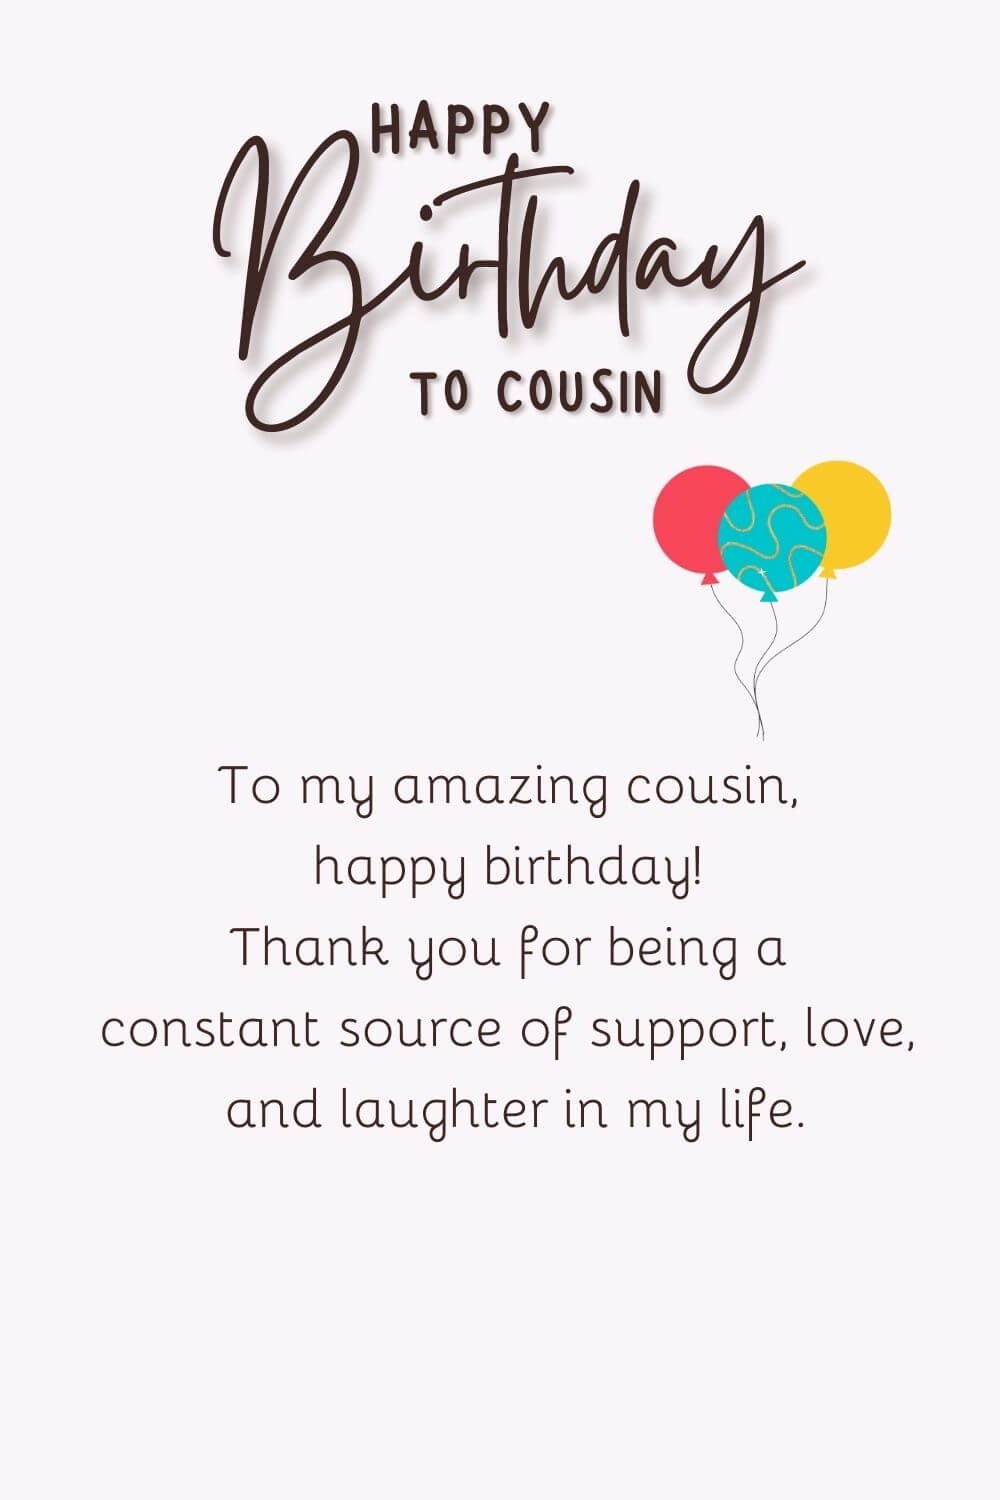 HBD cousin cute wishes with images